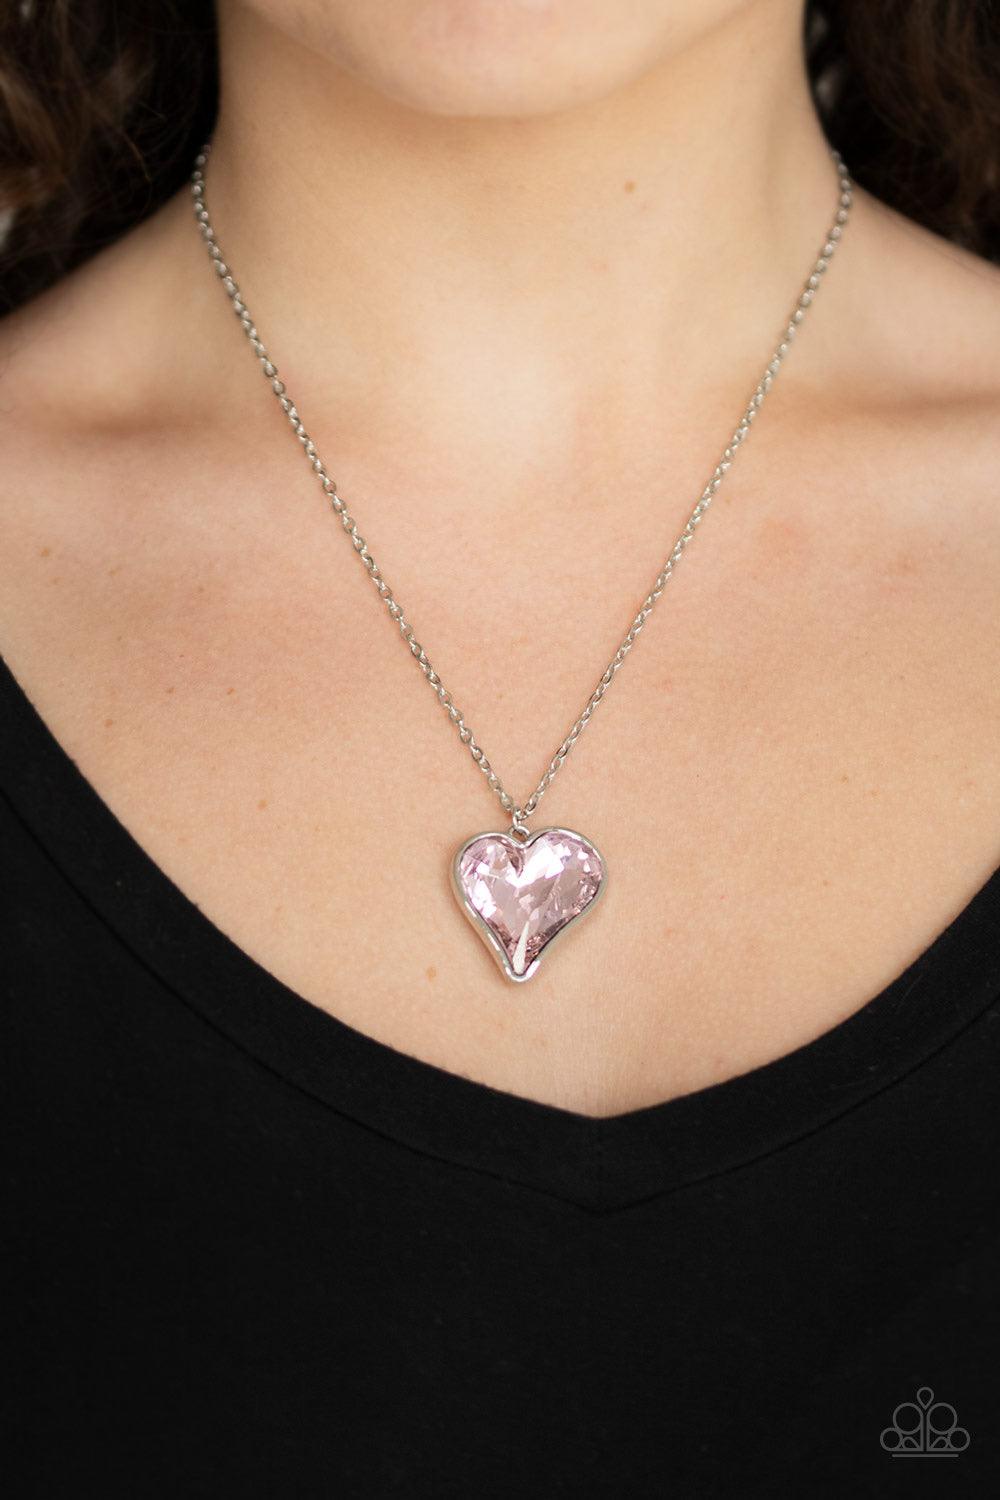 Paparazzi Accessories Heart Flutter - Pink Chiseled into a charming heart, an oversized pink rhinestone gem is nestled inside a sleek silver frame, creating a flirtatious pendant below the collar. Features an adjustable clasp closure. Jewelry